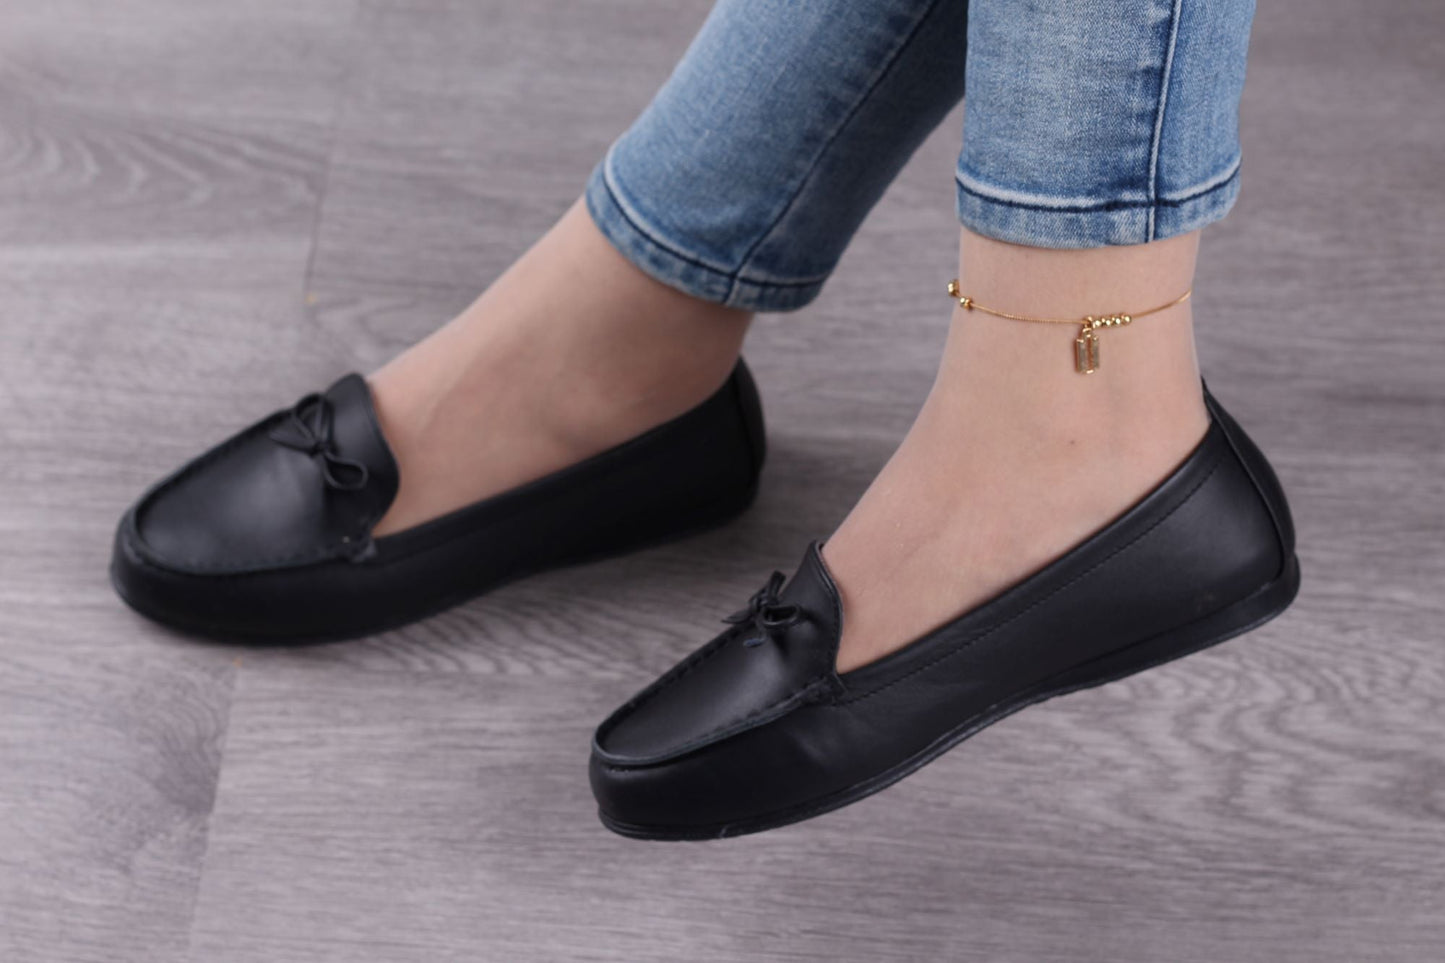 Women's genuine leather shoes that show your elegance and provide you with the greatest amount of comfort for long walks without fatigue